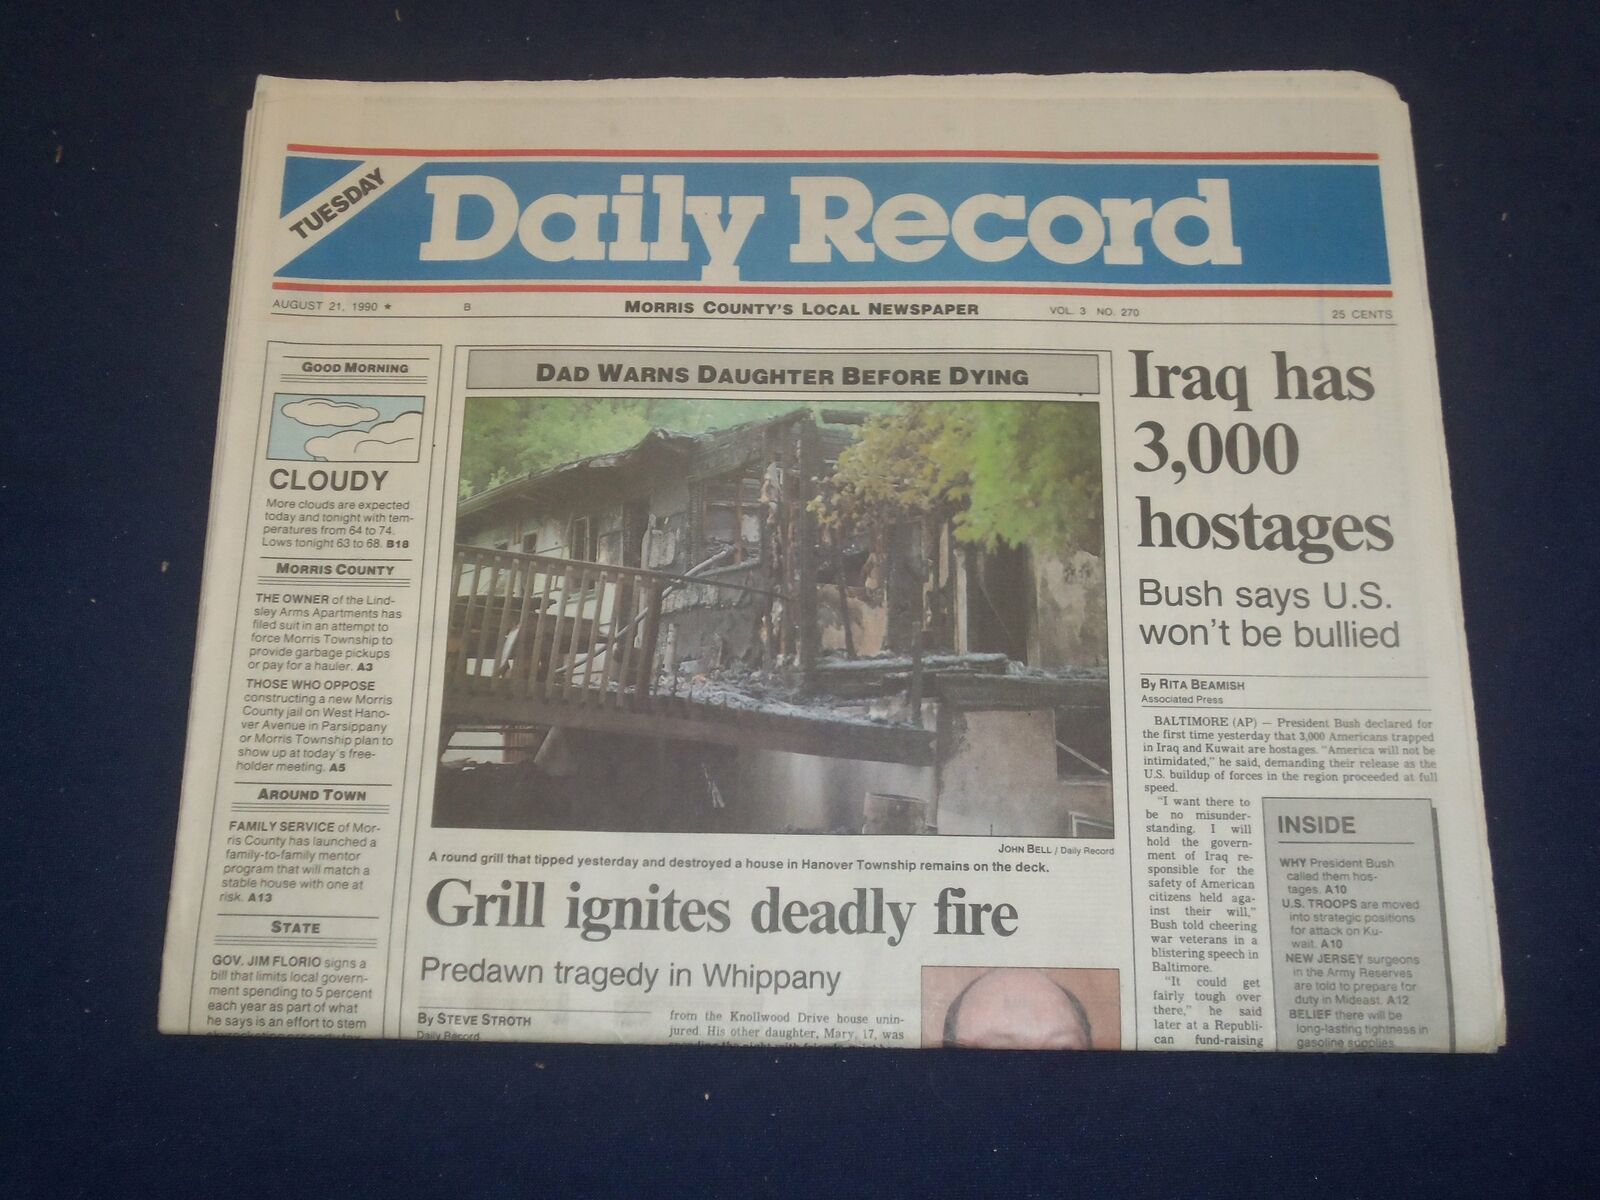 1990 AUG 21 MORRIS COUNTY DAILY RECORD - LOT OF 2 - IRAQ HOSTAGES - NP 3200M